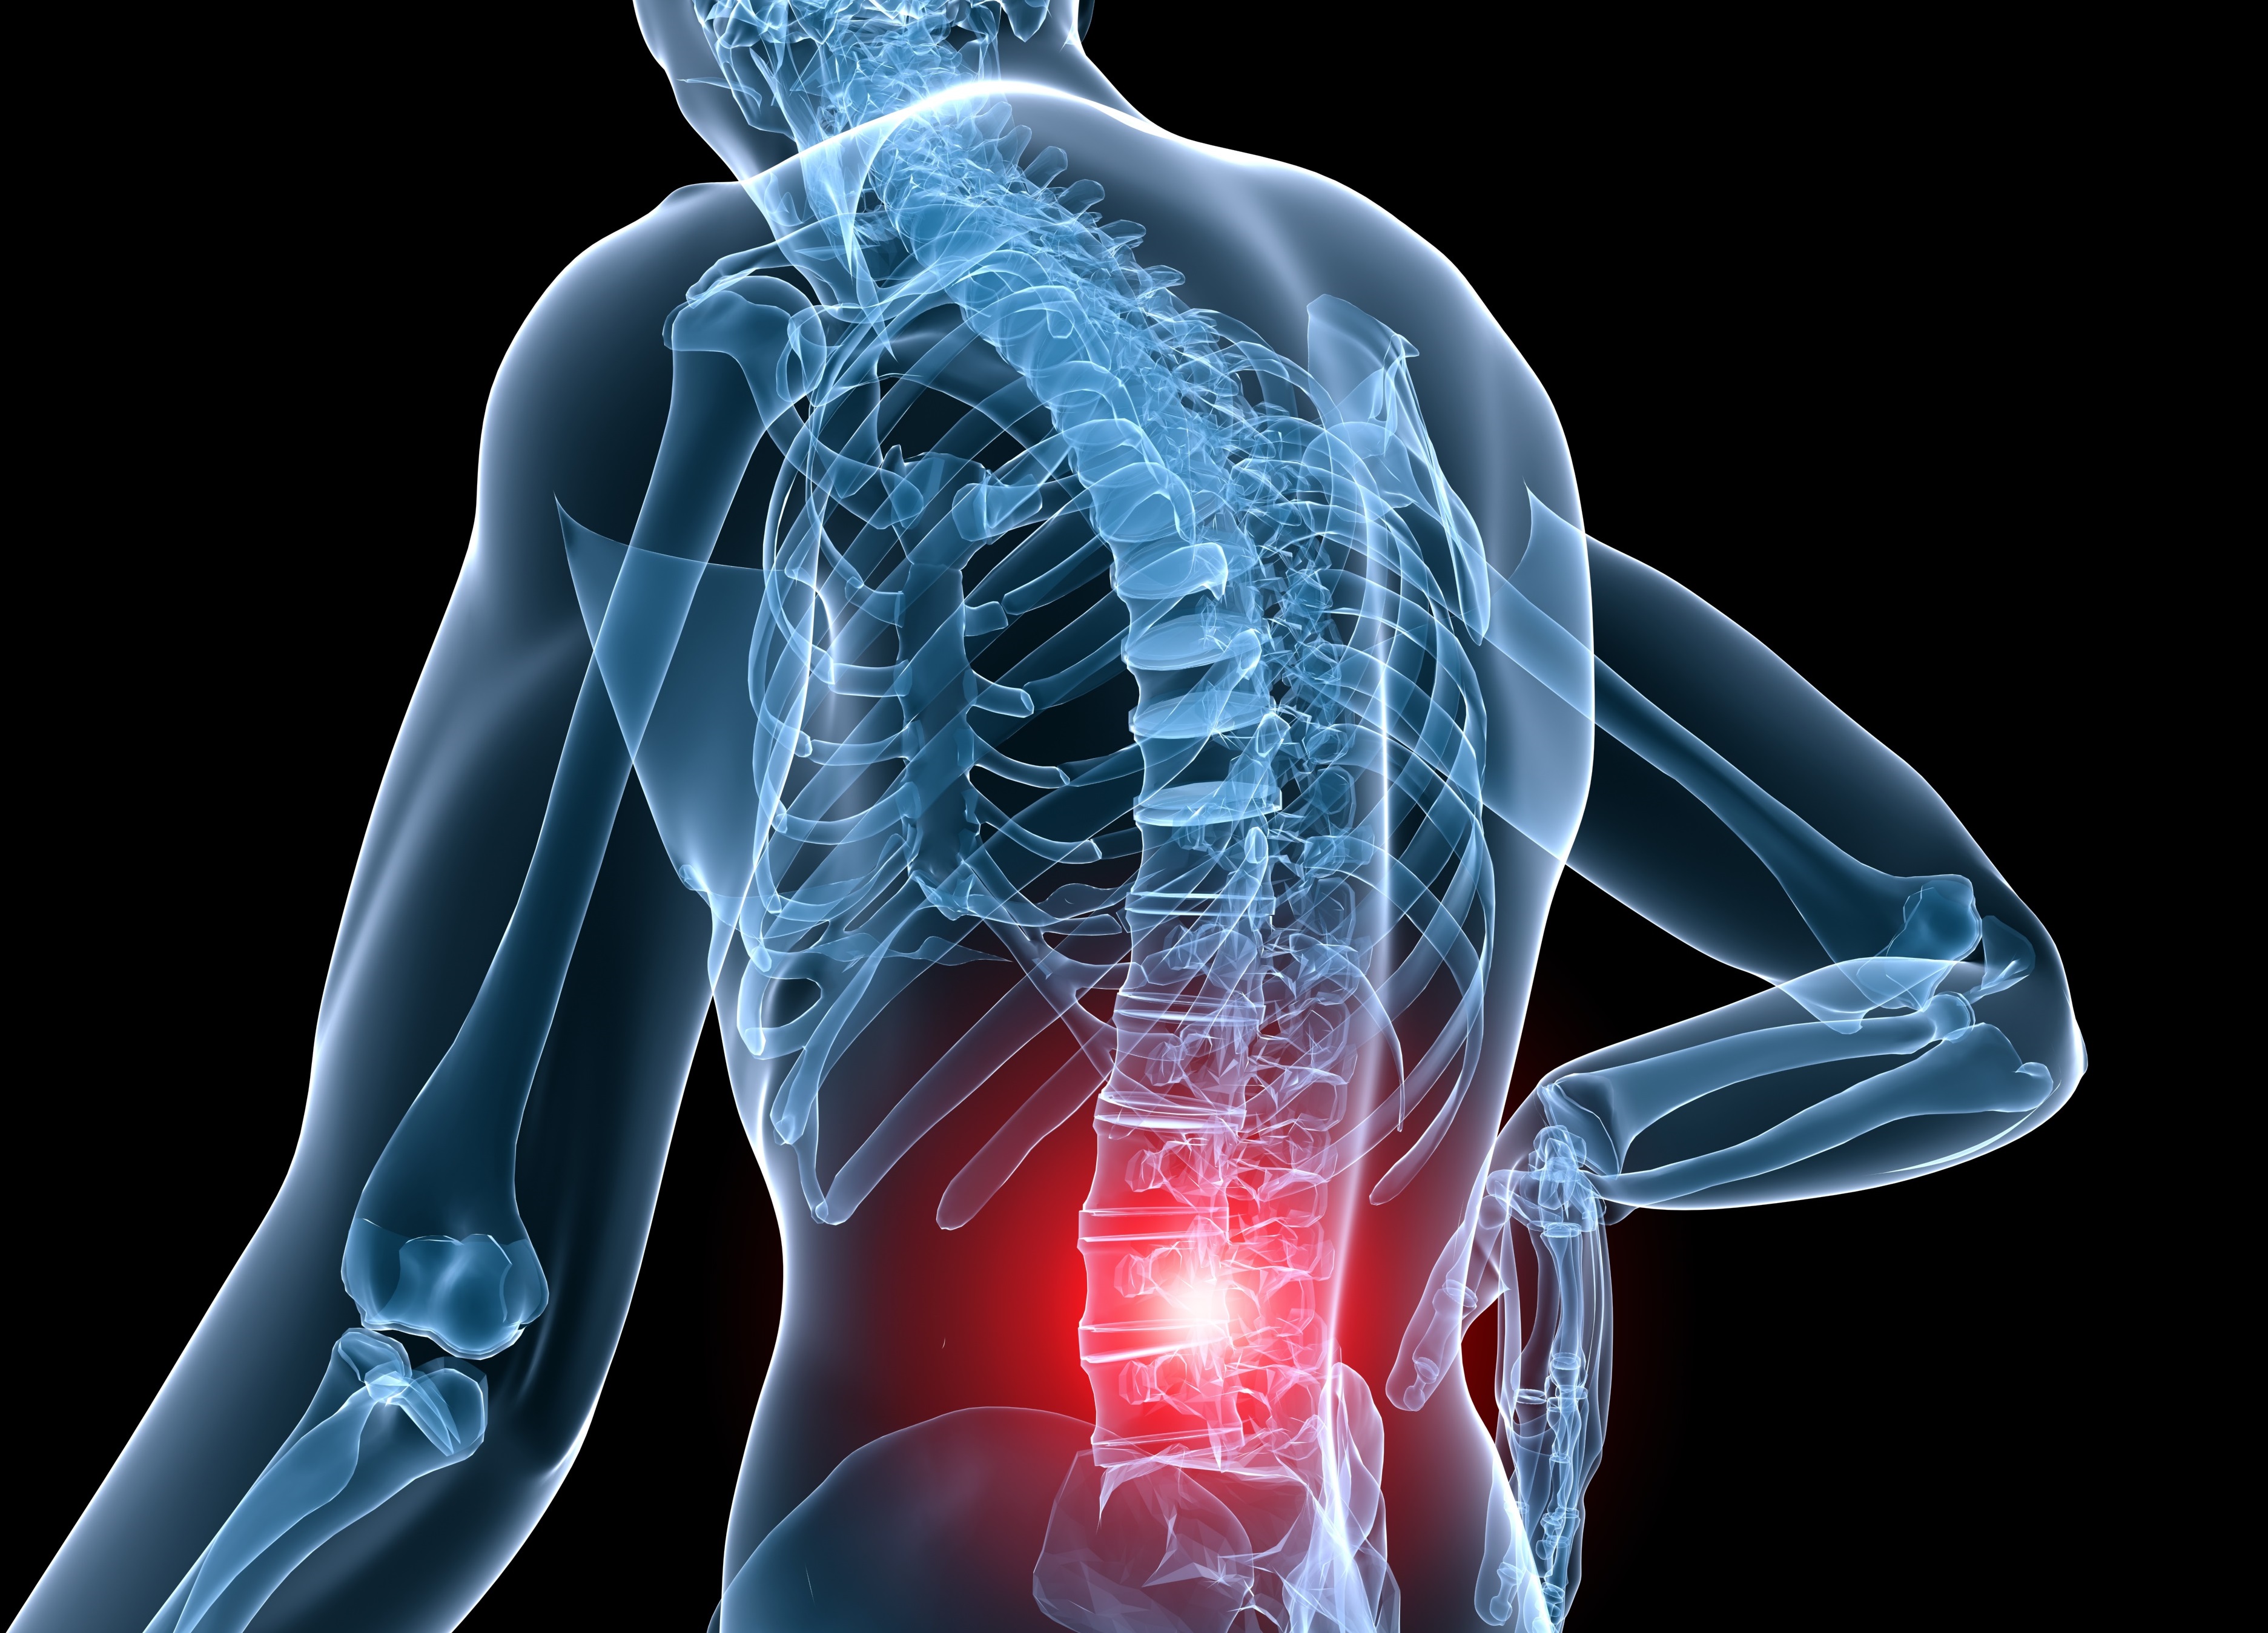 What you should know about Nonsurgical Spinal Decompression